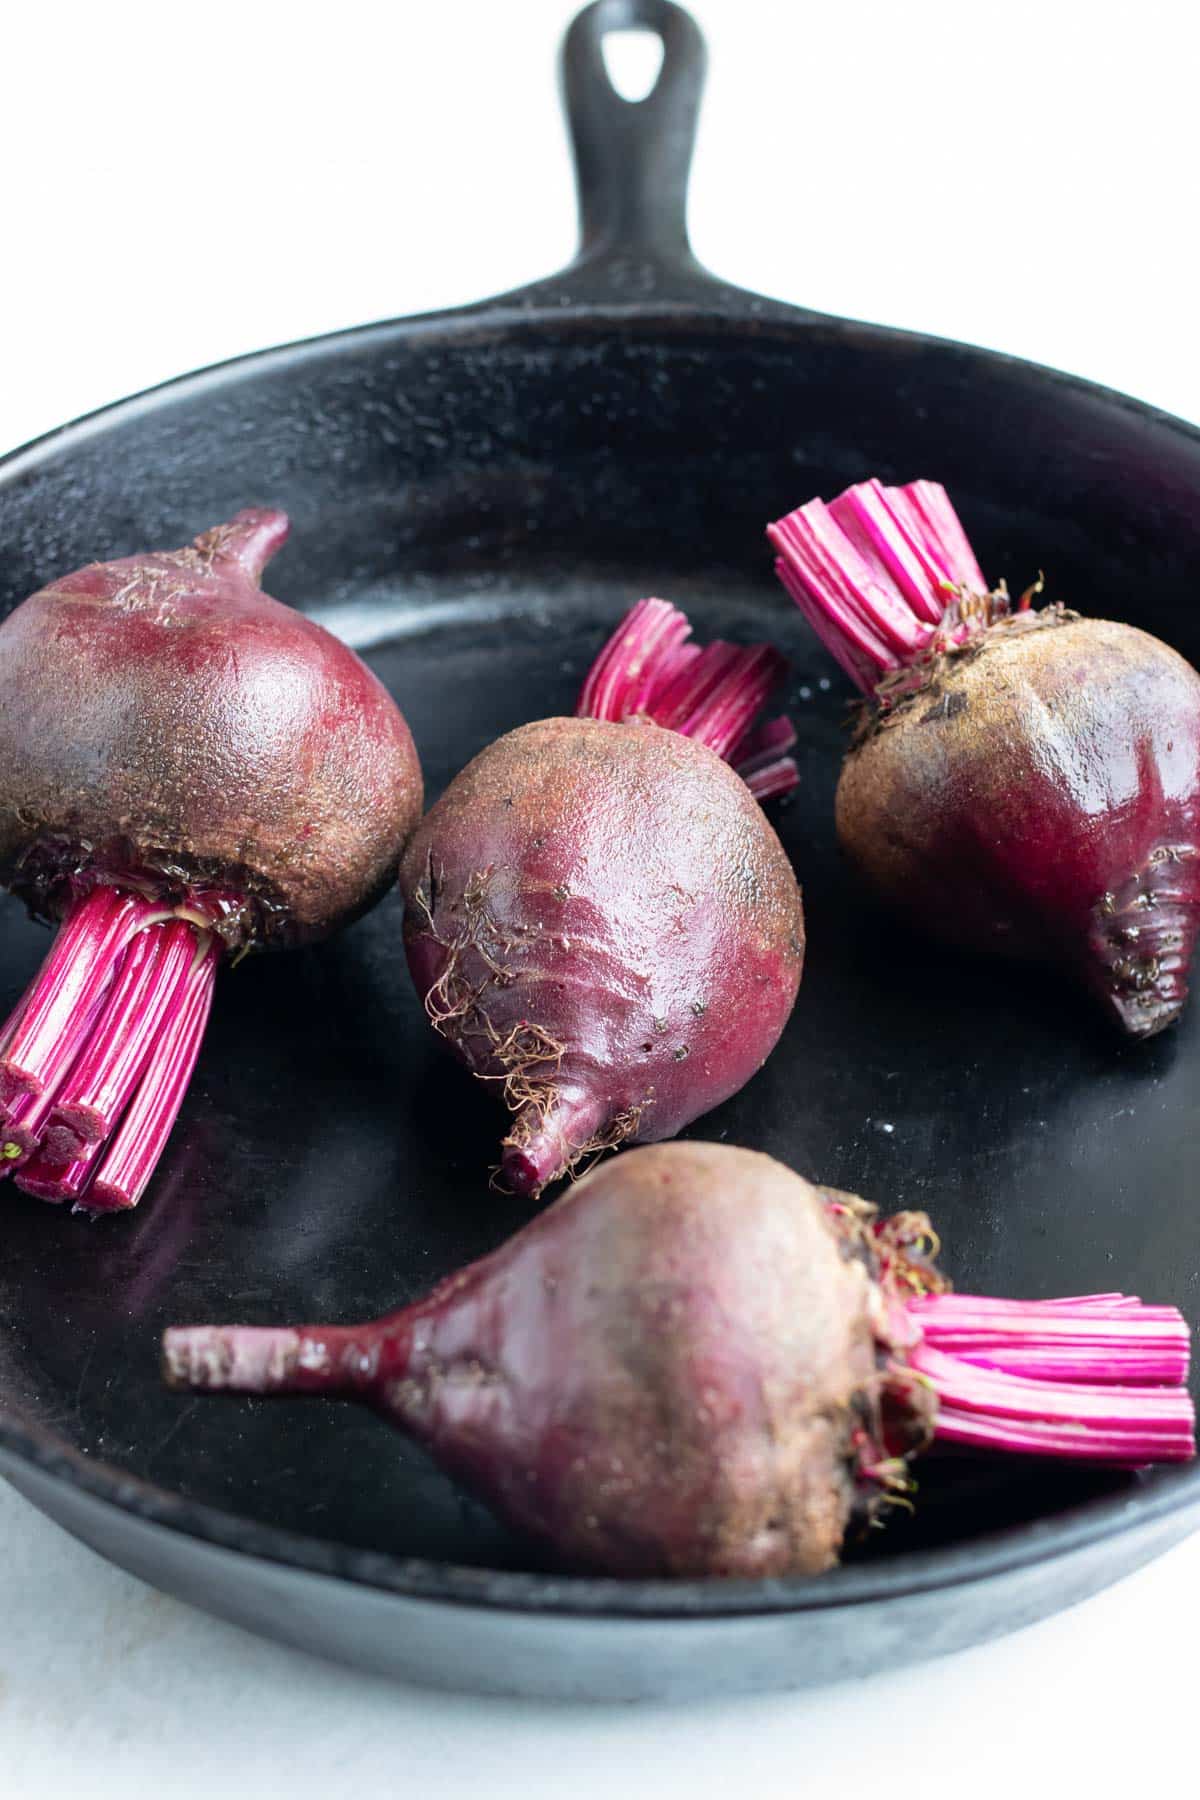 Beets are added to a cast iron skillet and baked in the oven.